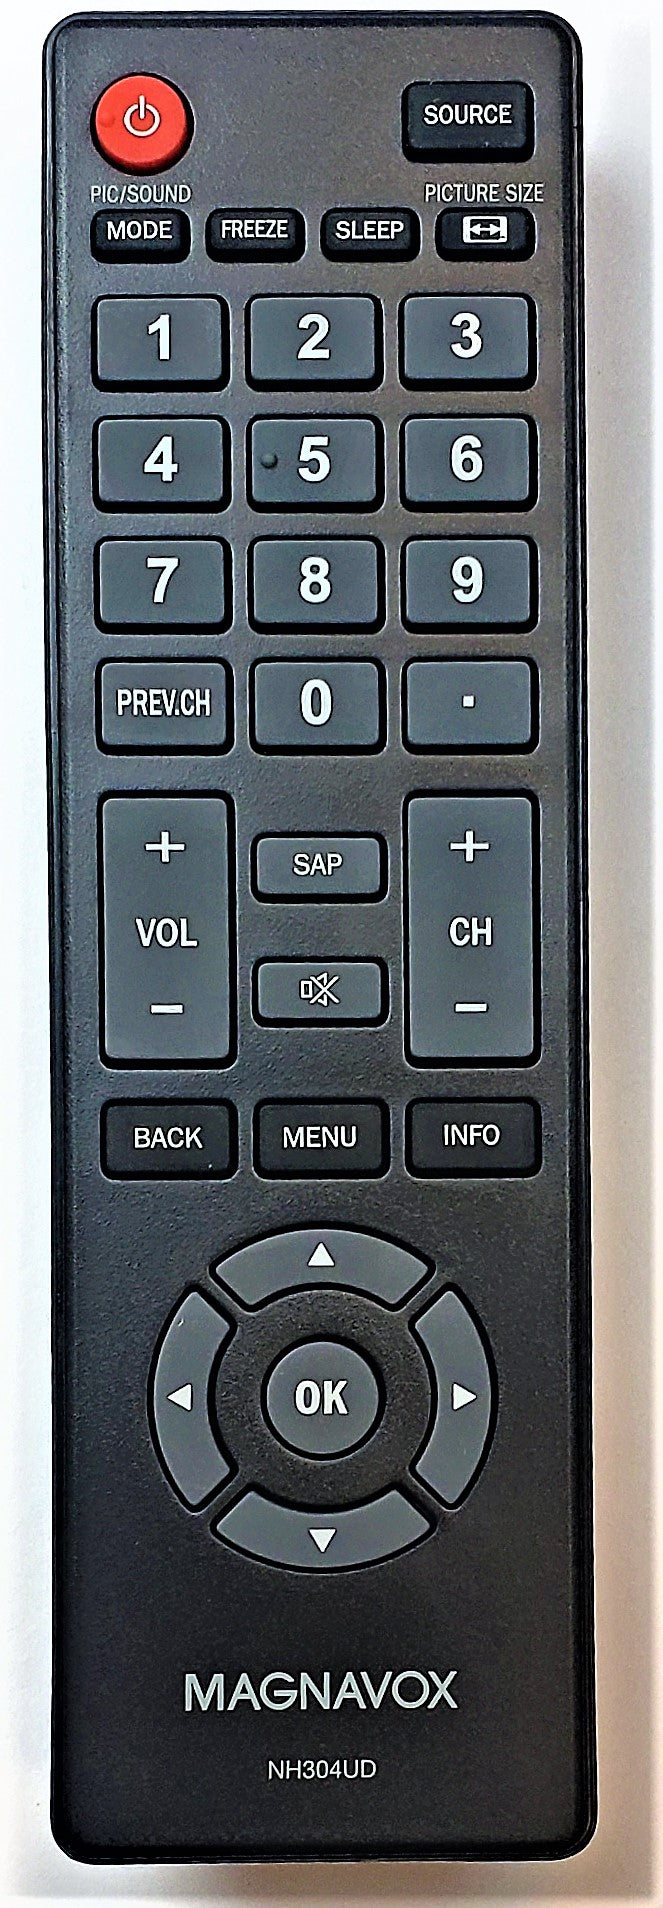 Original OEM replacement remote control for Magnavox LED/LCD TVs NH304UD